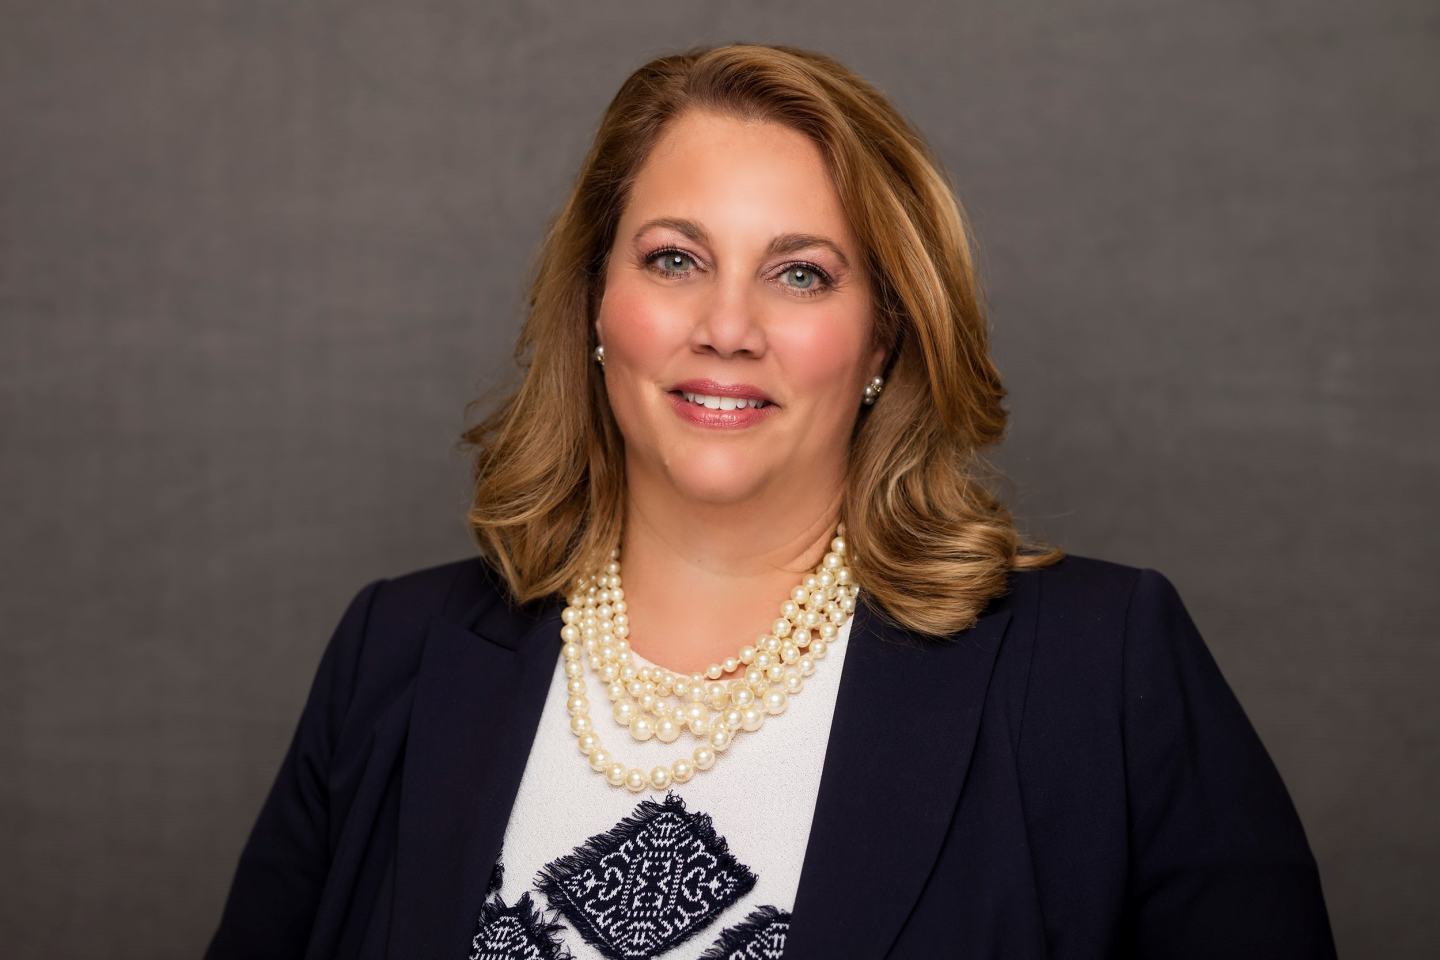 Jacqueline (Jackie) Scanlan, FMC executive vice president and chief human resources officer